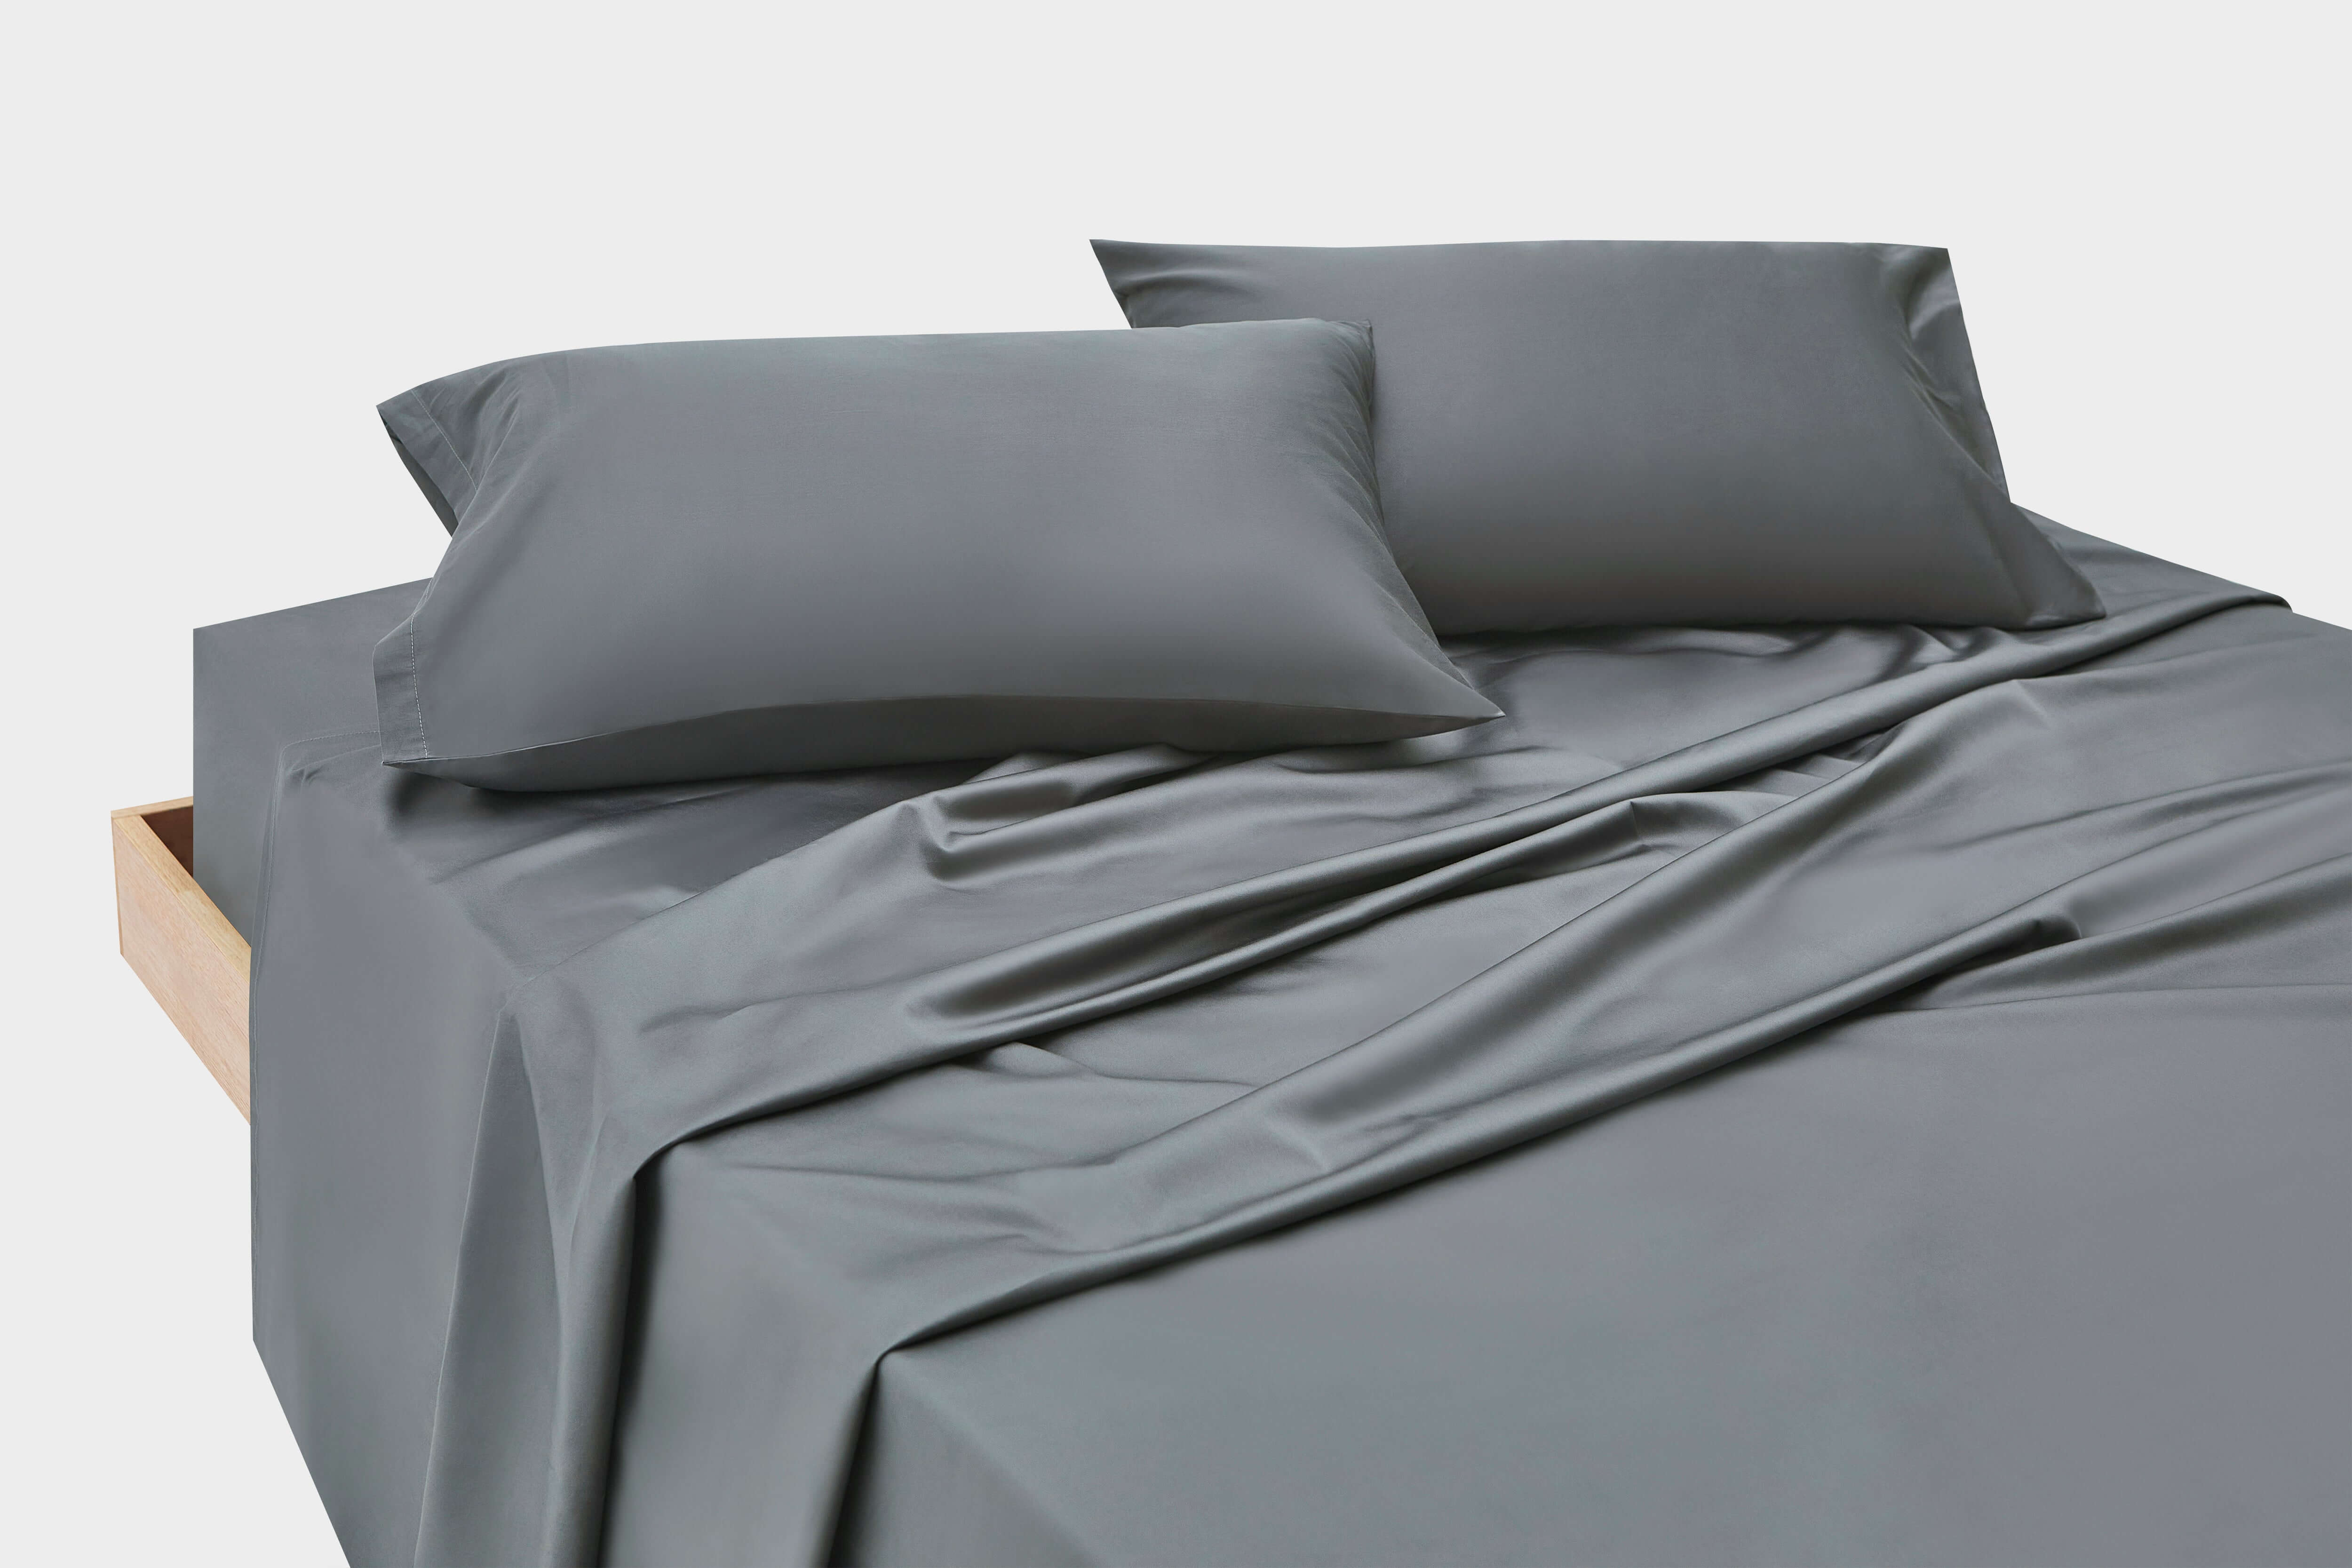 Souver's Organic Cotton Bedding: Where Luxury Meets Sustainable Comfort